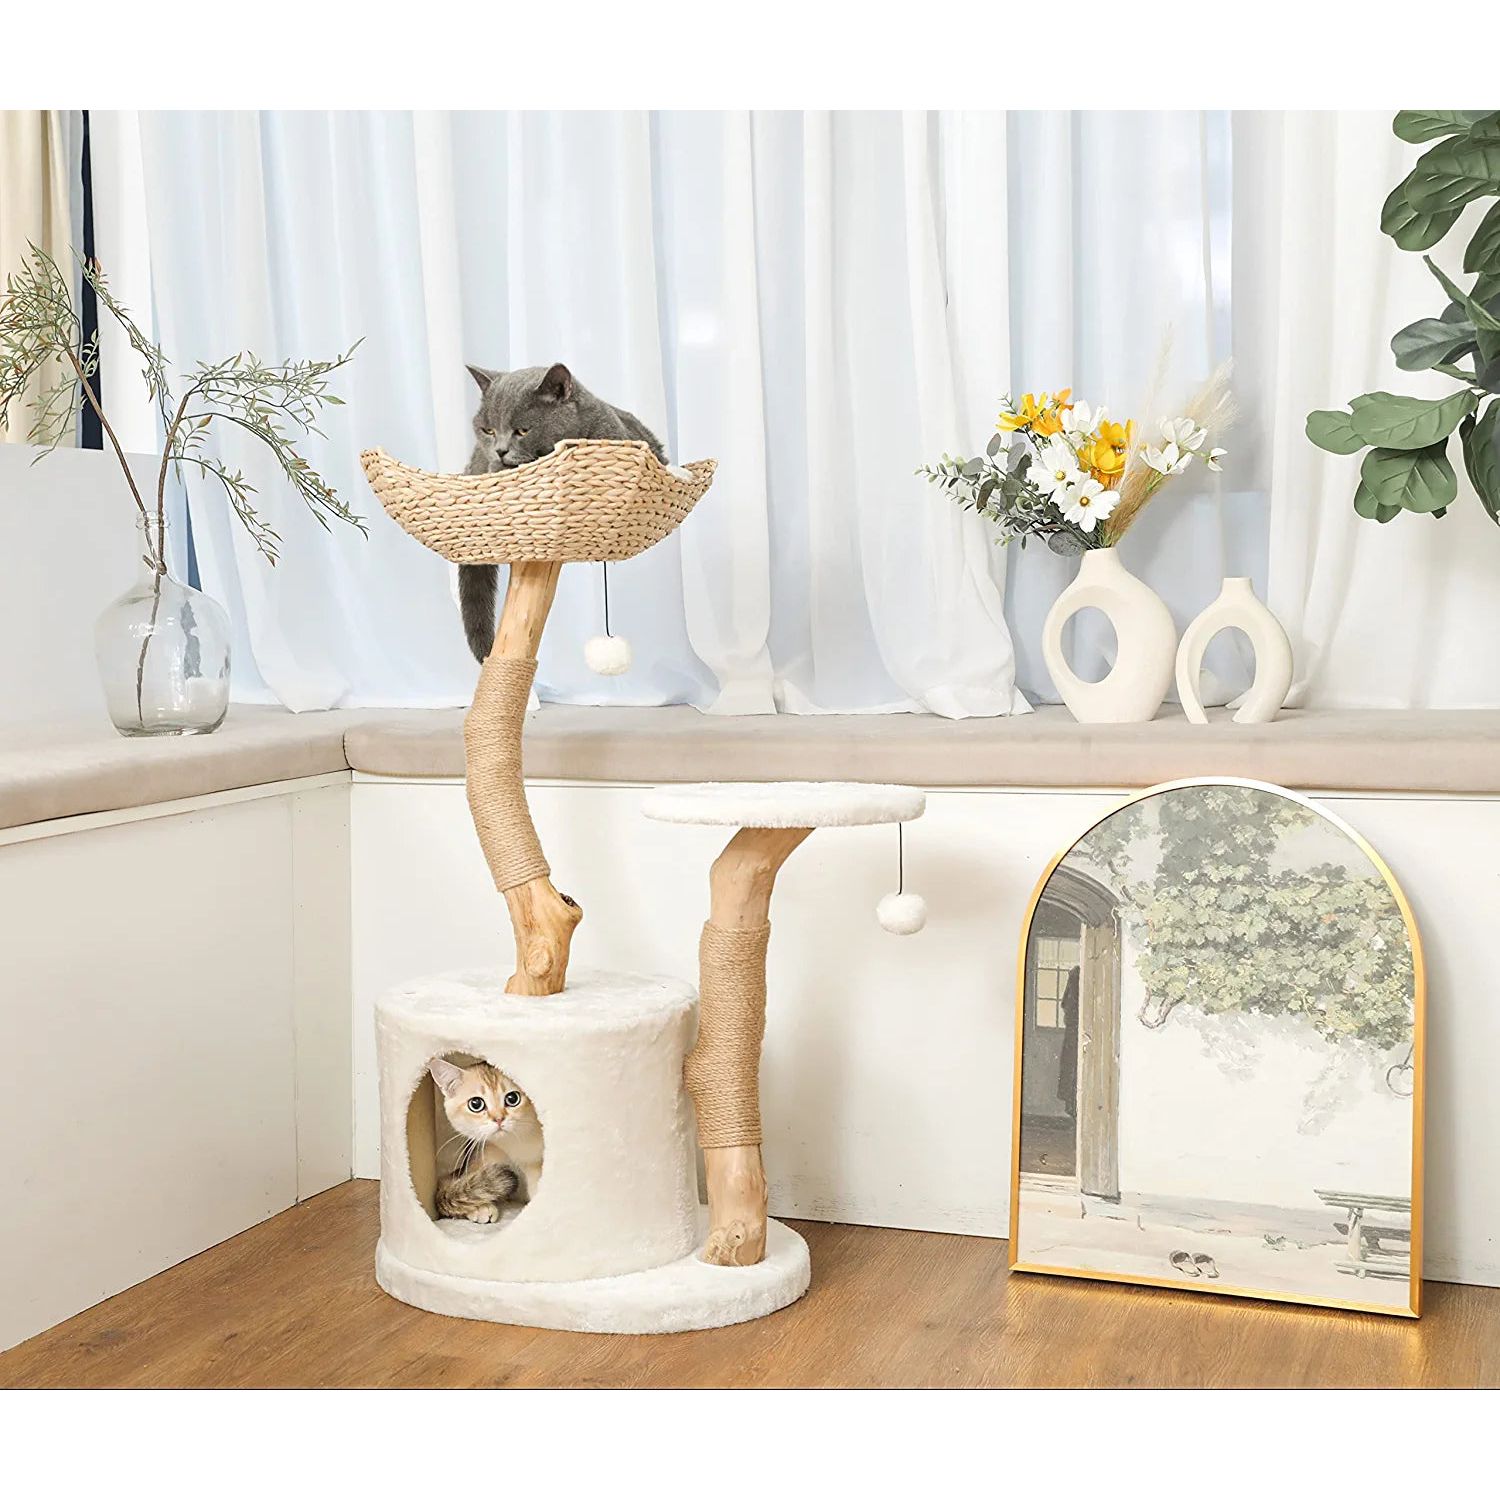 Modern Luxury Cat Tree - Real Wood Cat Tower with Scratch Post Tree Branch Cat Condo